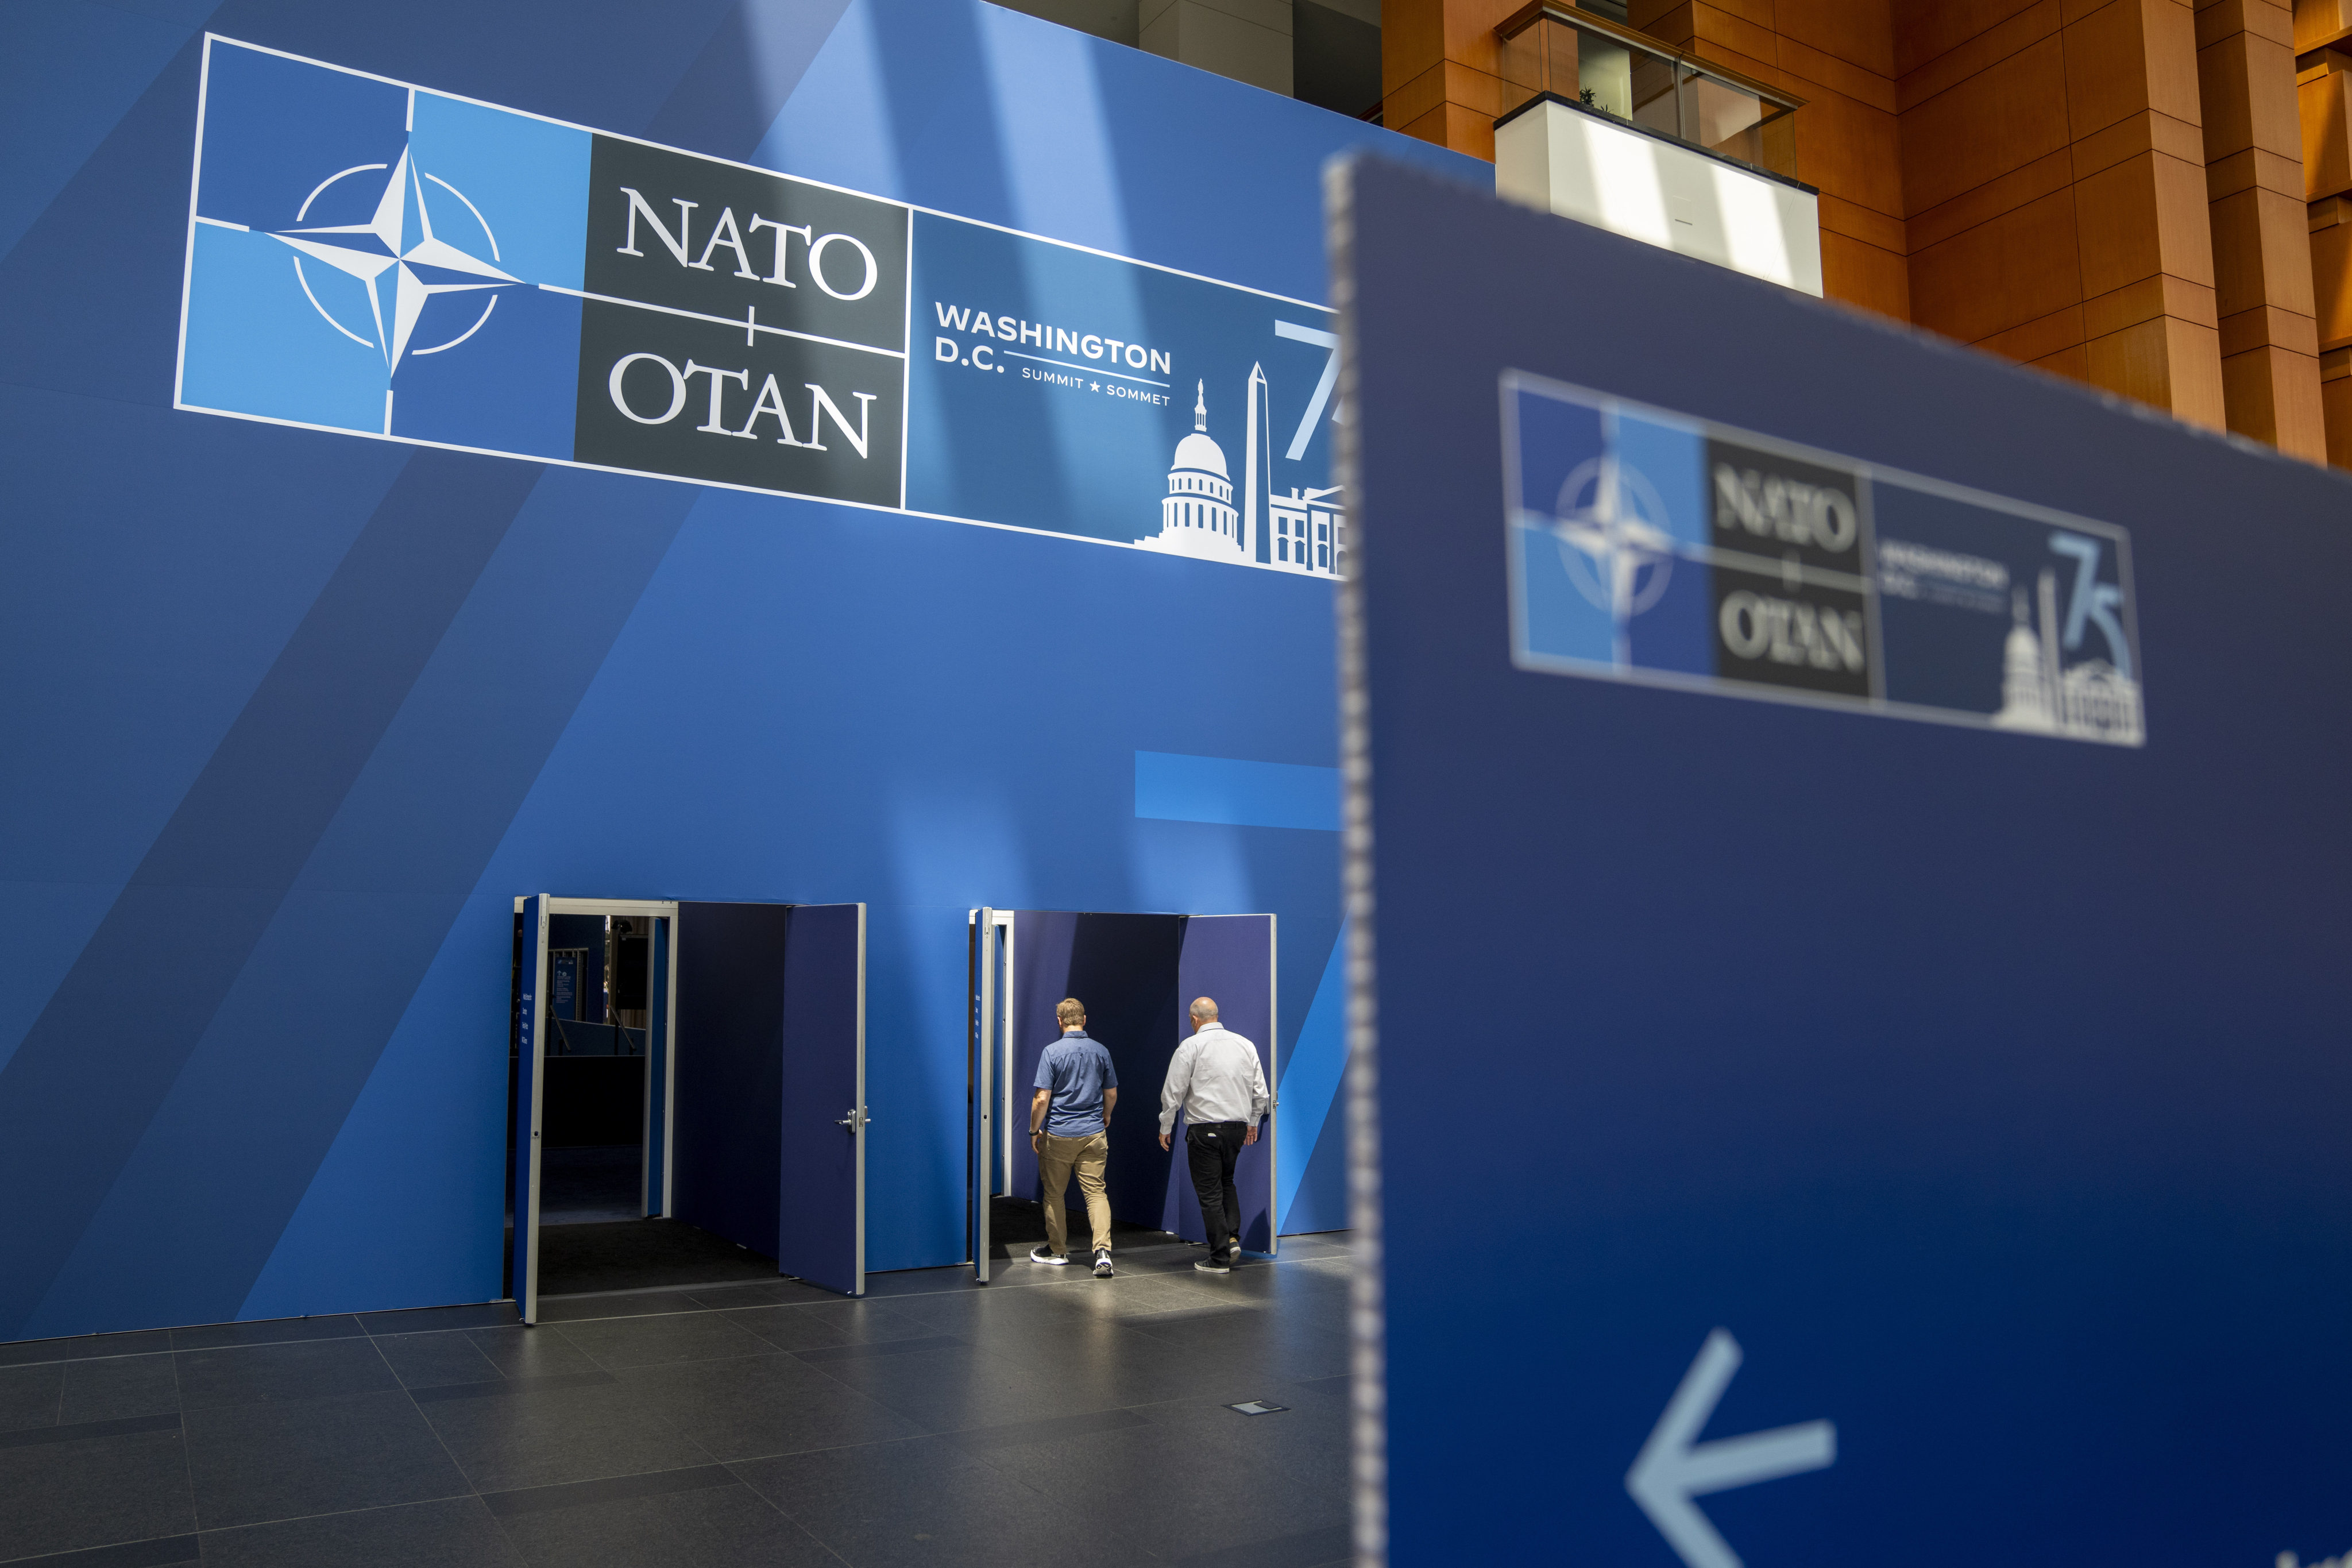 The Walter E. Washington Convention Center on Monday, July 8, 2024, which has been decorated in time for the Nato Summit. Photo: AP